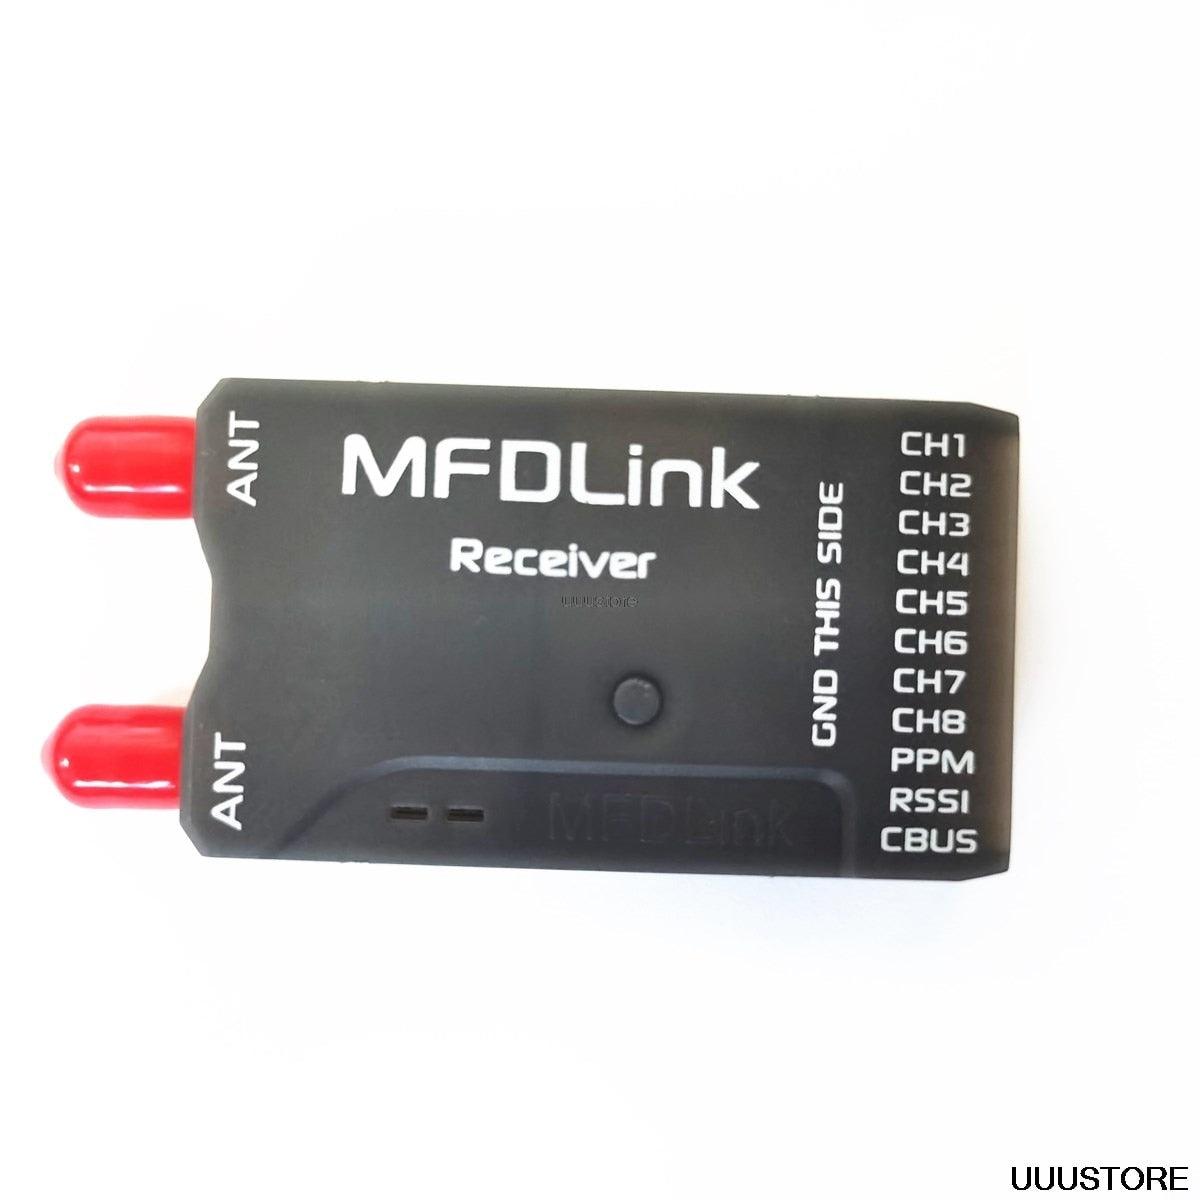 MFDLink TS4047 - 50KM Long Range System Rlink 433Mhz 16CH 1W RC UHF System Transmitter w/8 Channel Receiver TX+RX Set For fpv drone - RCDrone